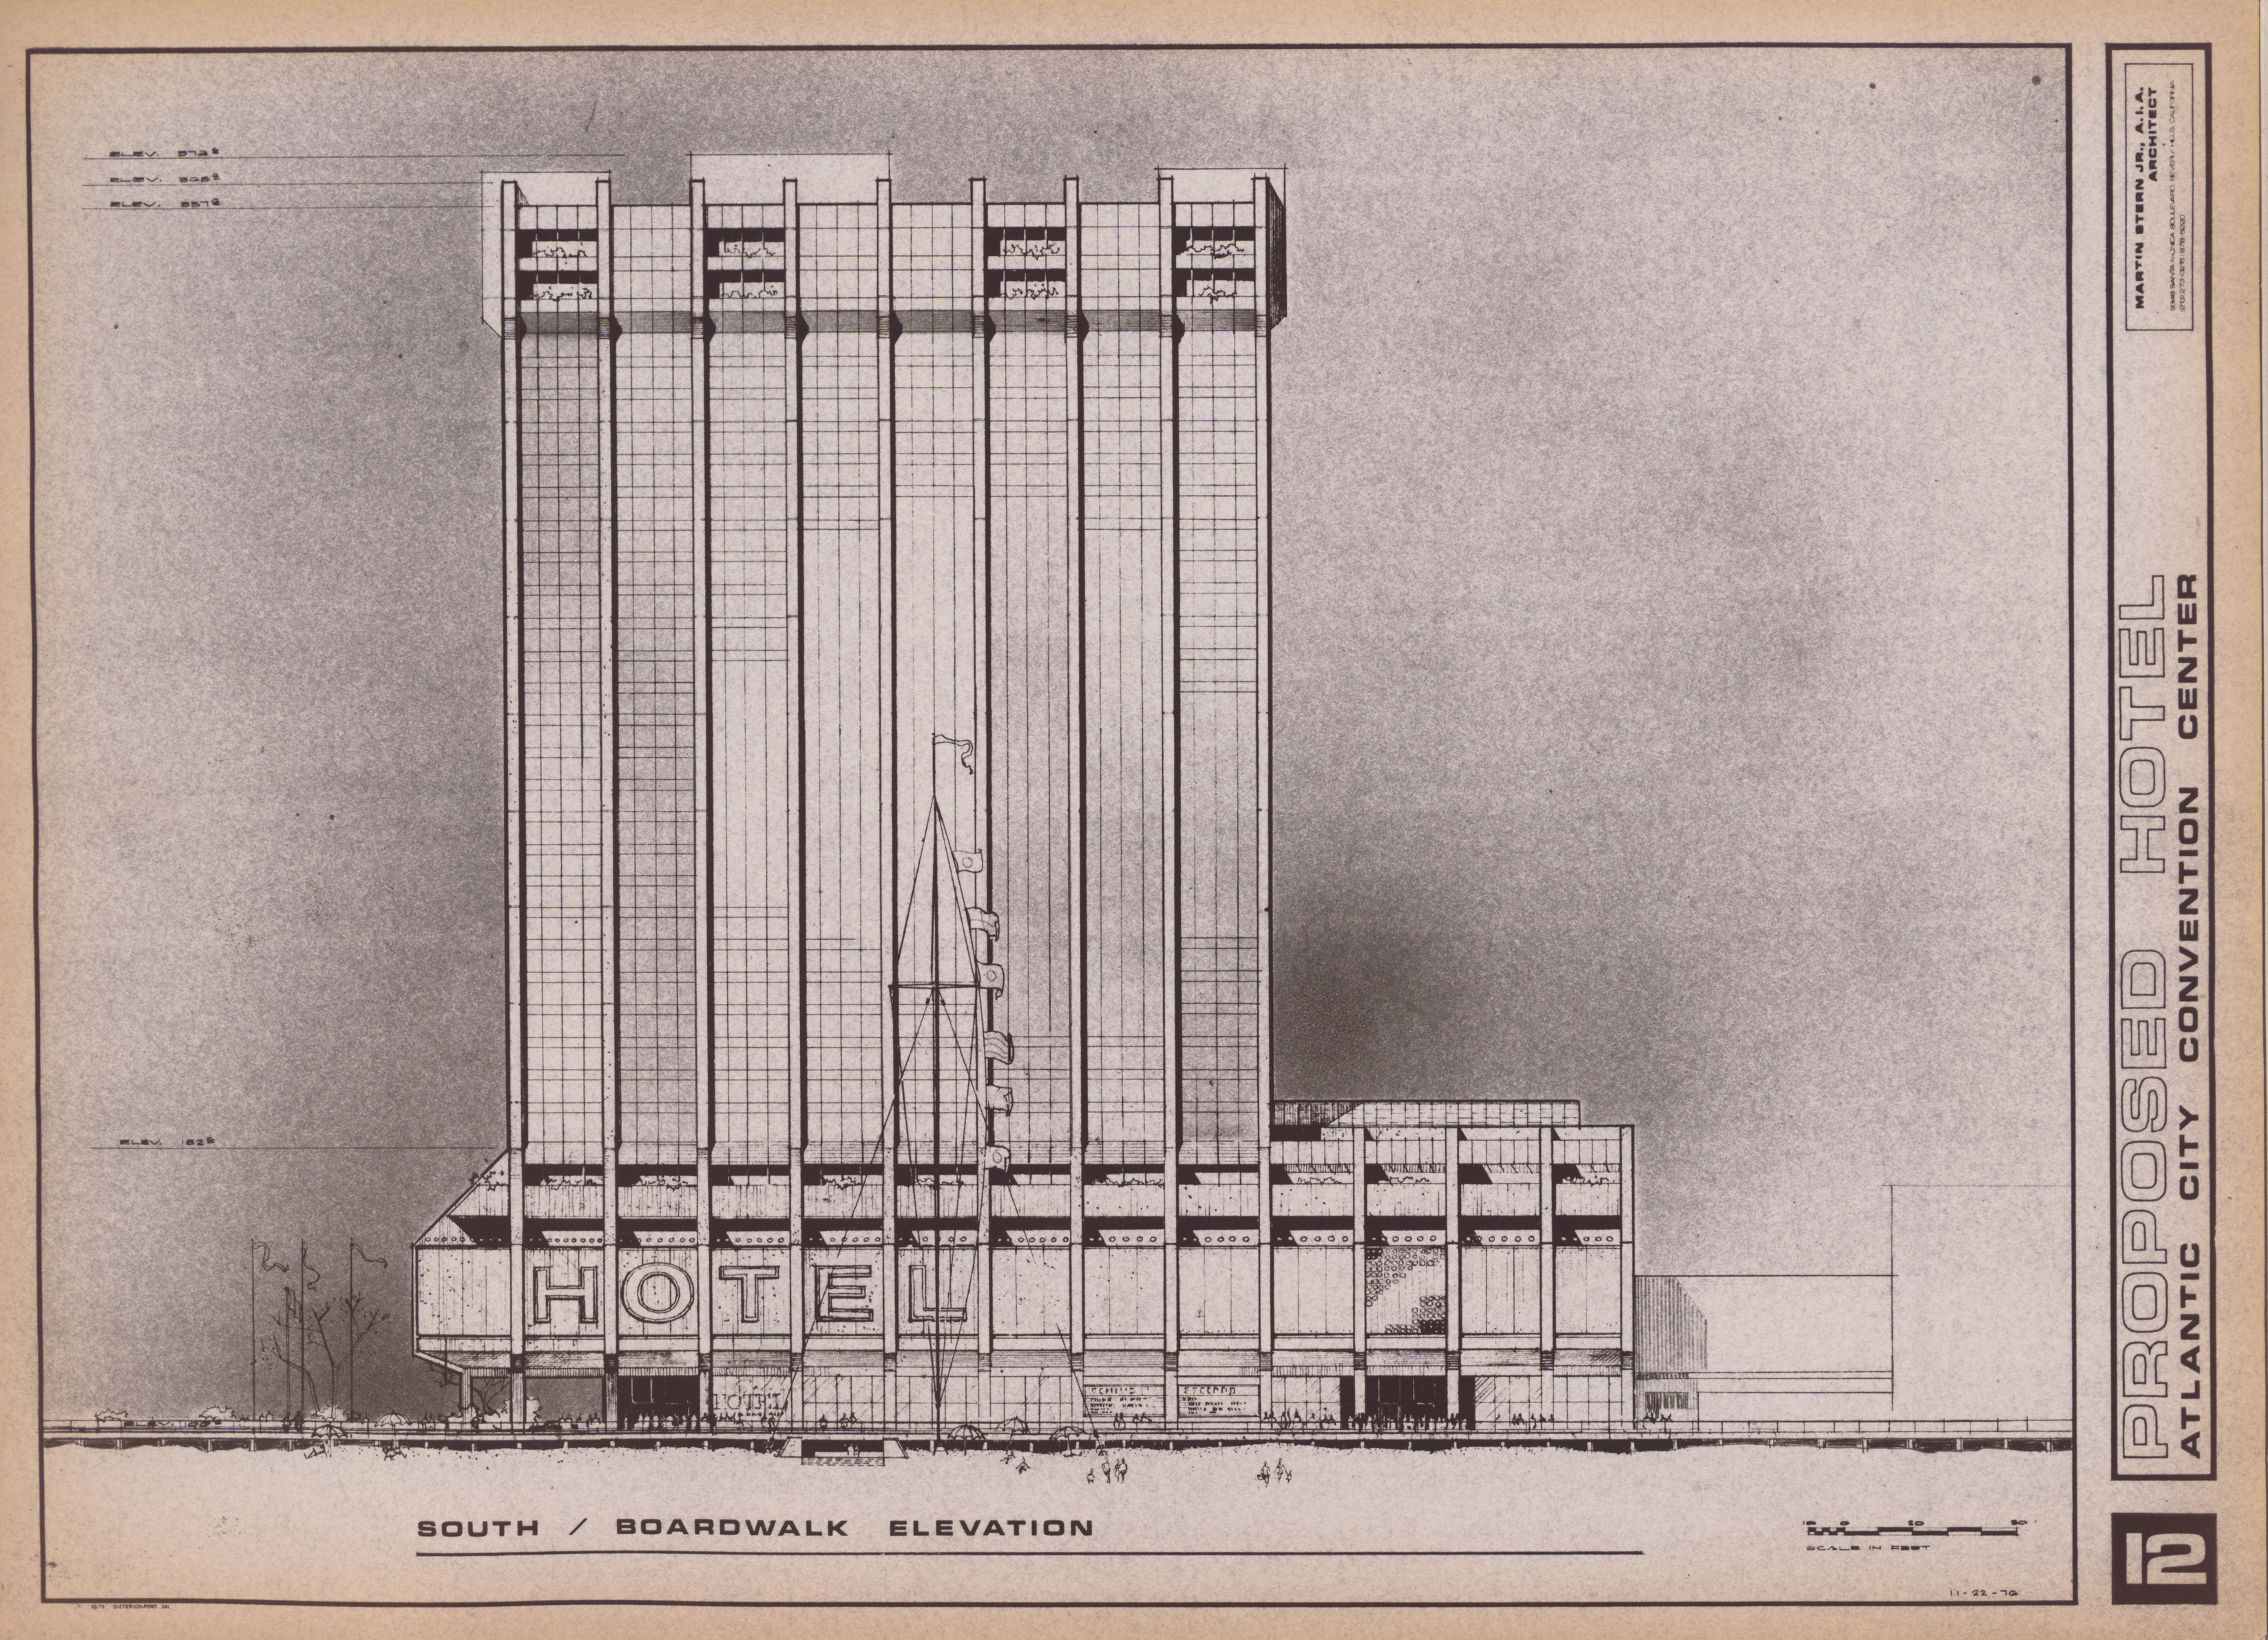 Proposed Hotel, Atlantic City Convention Center, image 12